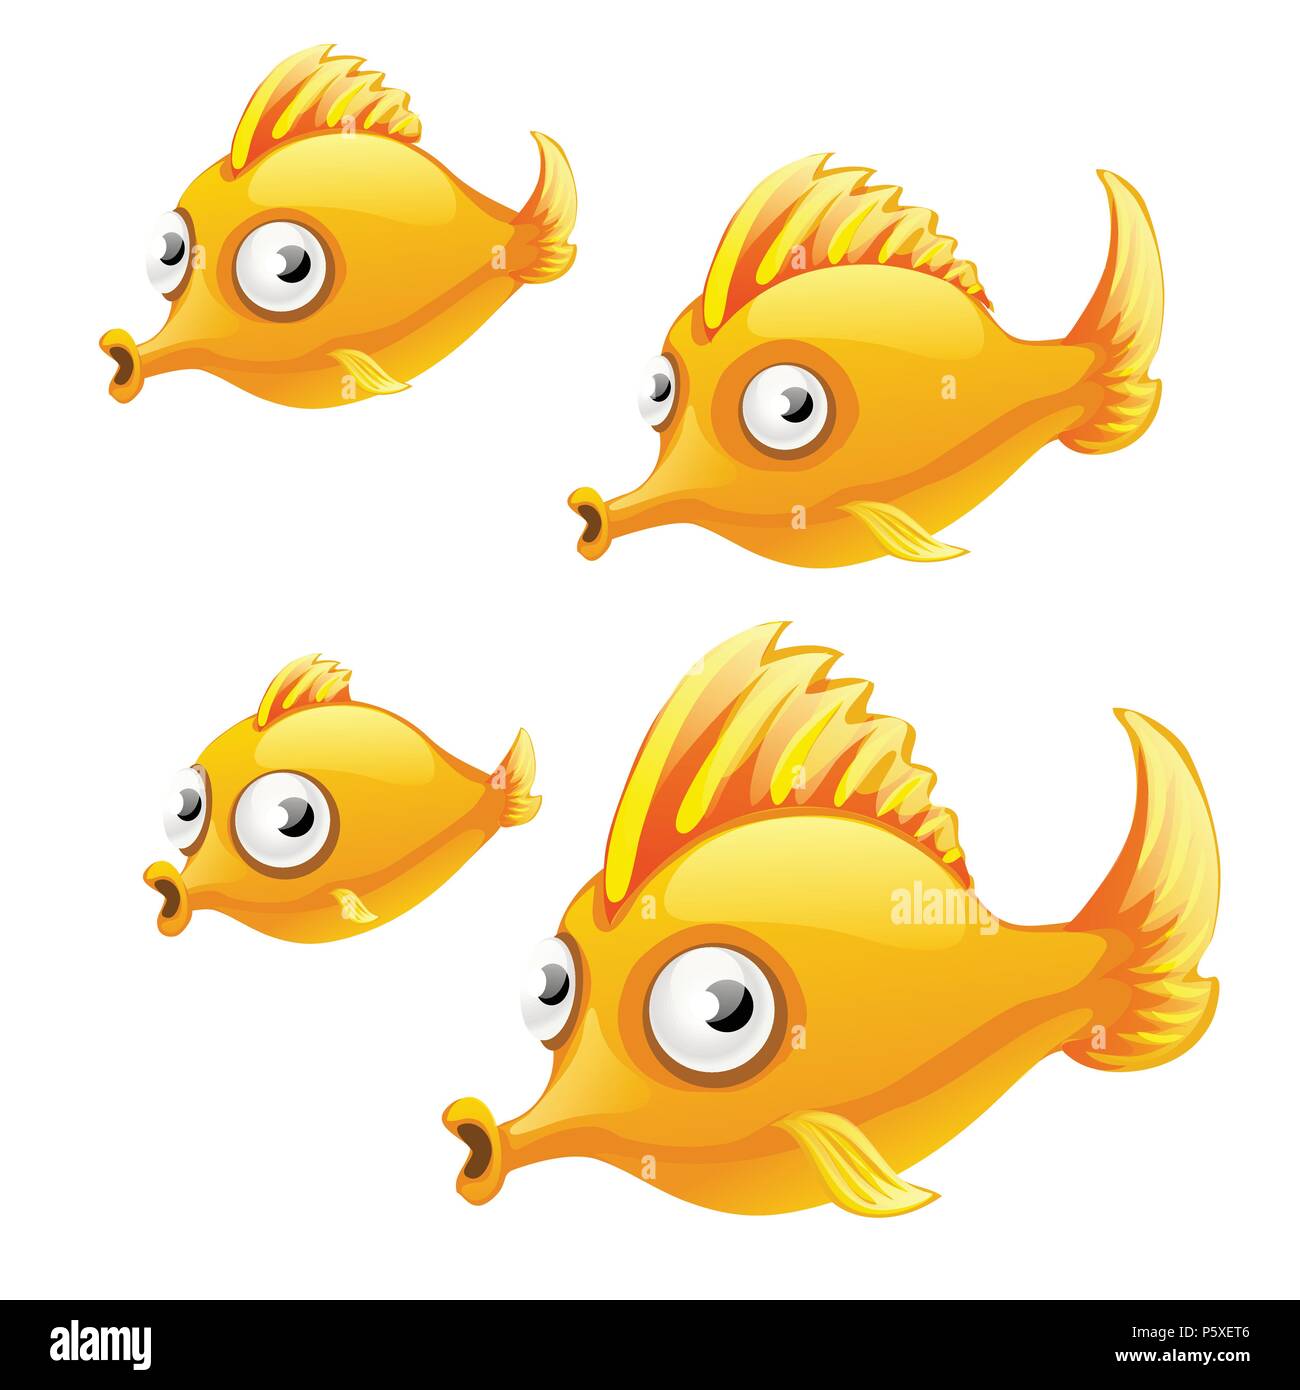 Exotic fish face Stock Vector Images - Page 2 - Alamy